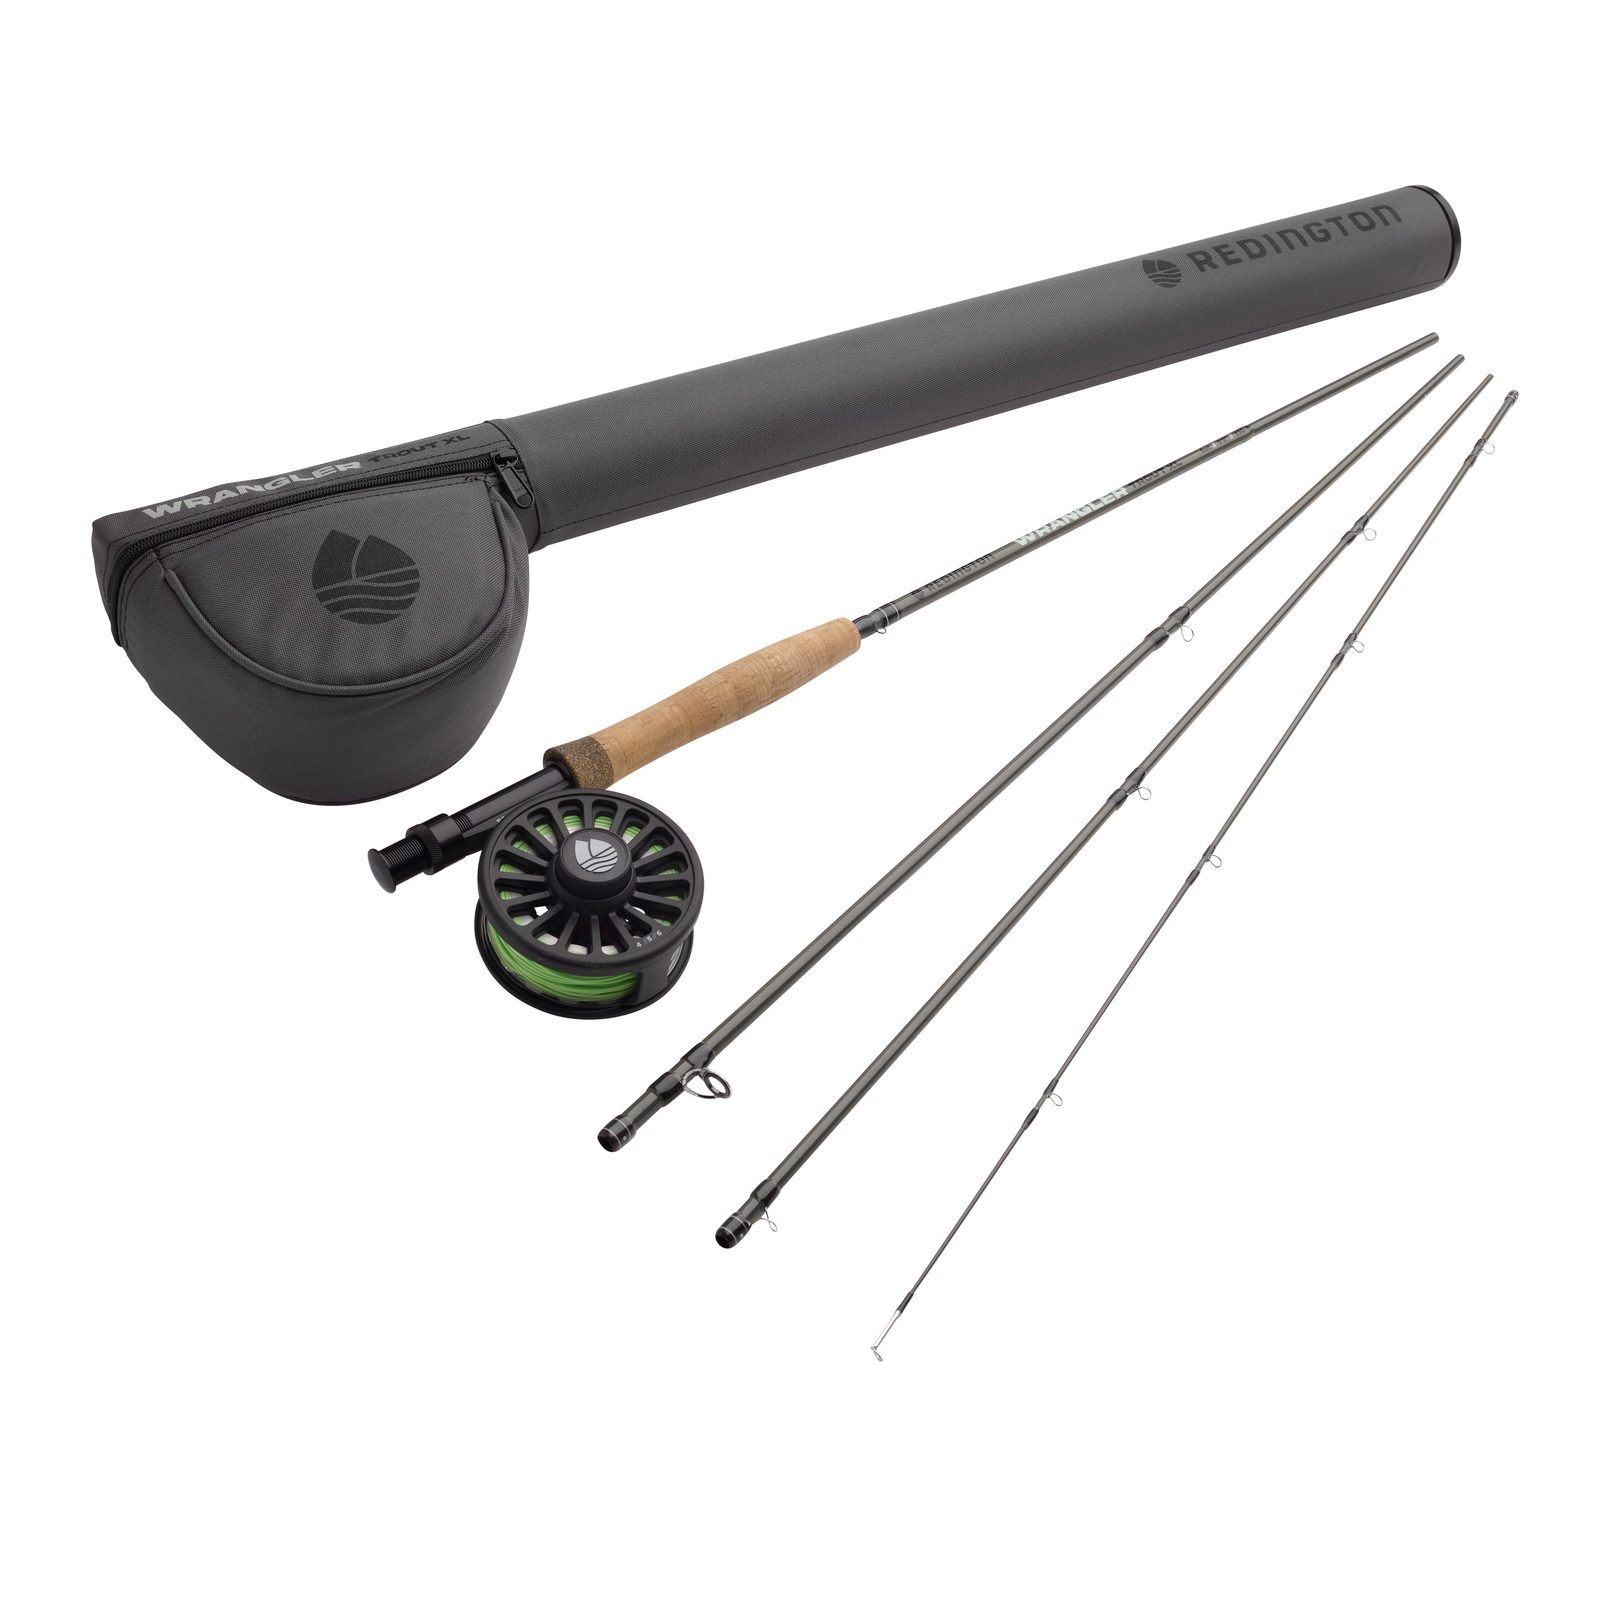 Wild Water Standard Fly Fishing Combo Starter Kit, 3 or 4 Weight 7 Foot Fly  Rod, 4-Piece Graphite Rod with Cork Handle, Accessories, Die Cast Aluminum  Reel, Carrying Case, Fly Box Case